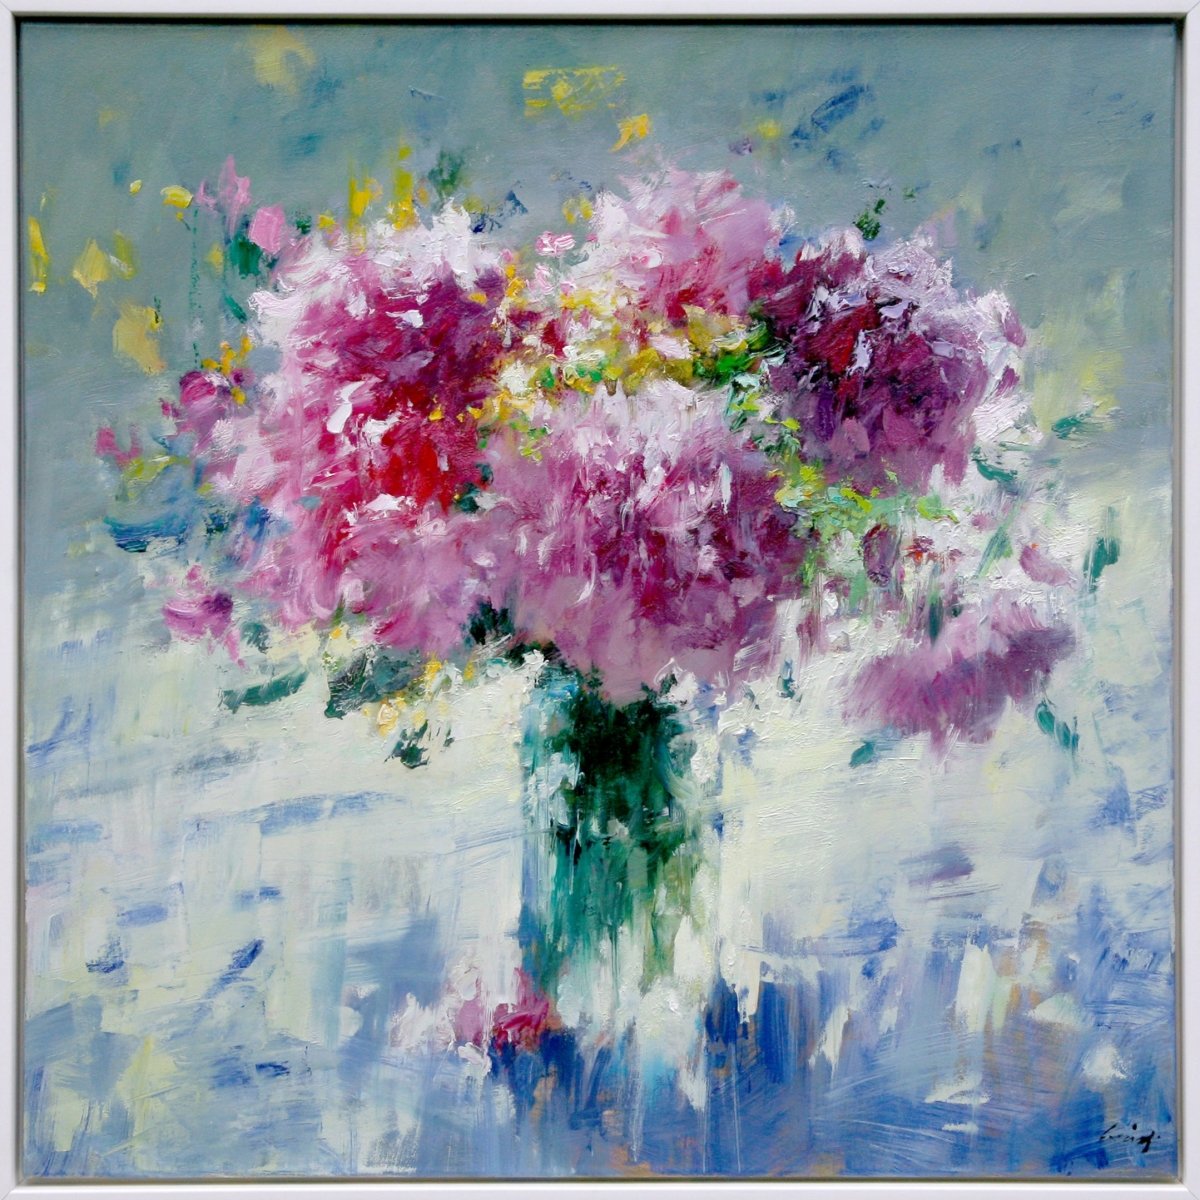 Peonies in Sunlight by Ning Lee at LePrince Galleries